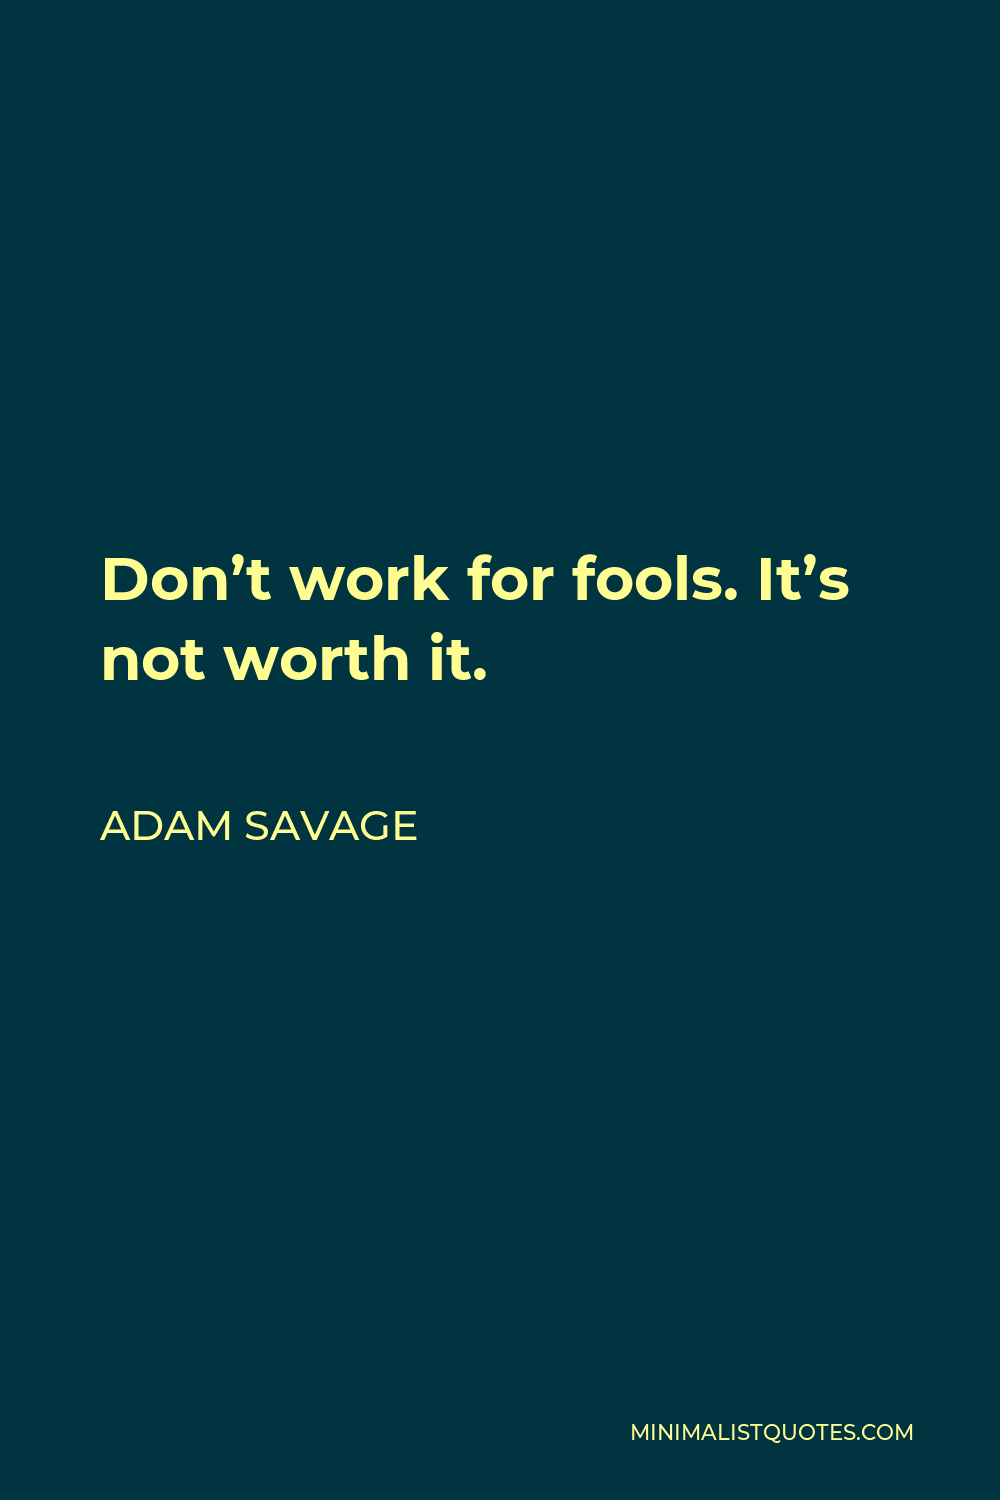 Adam Savage Quote: “I think LEGOs are one of the best toys ever